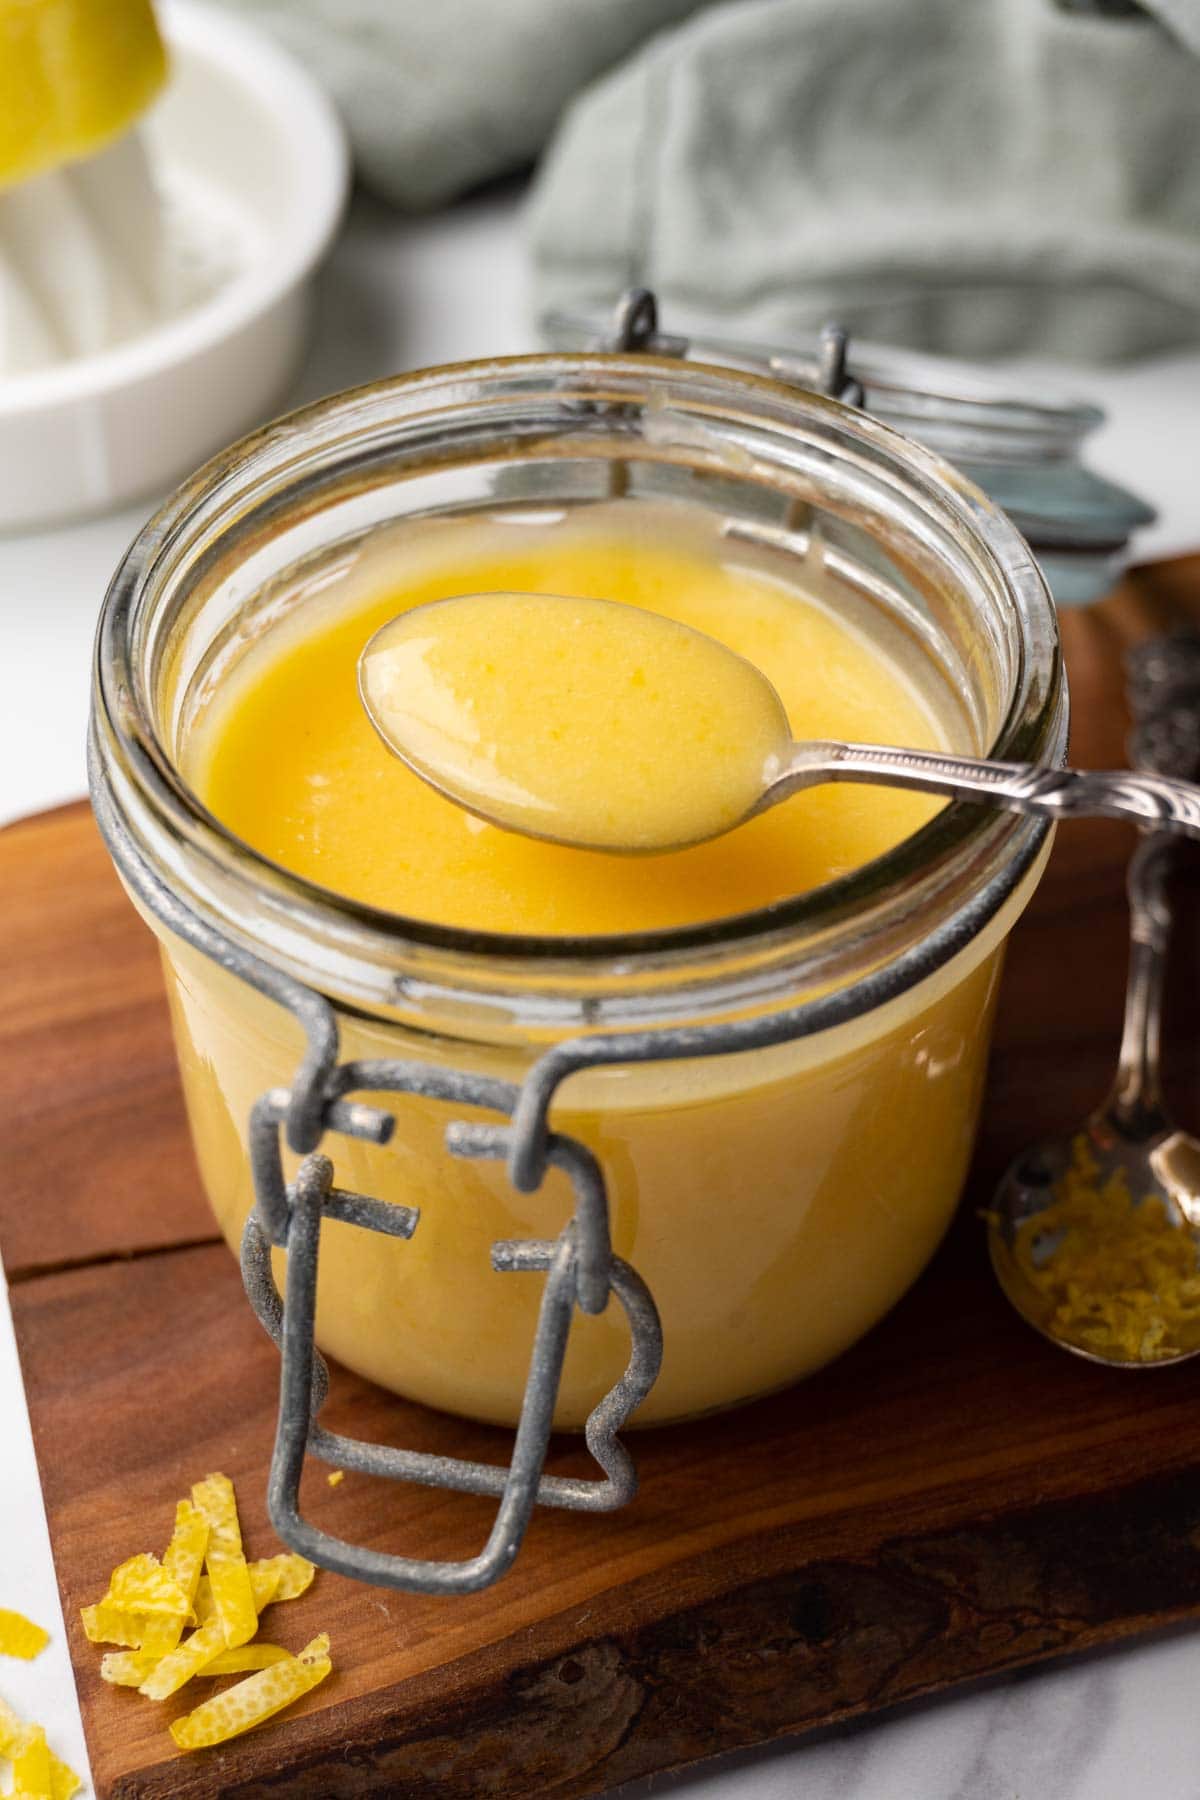 A glass jar filled with lemon curd is standing on a wooden board. A silver spoon with some curd is hovering over the jar.